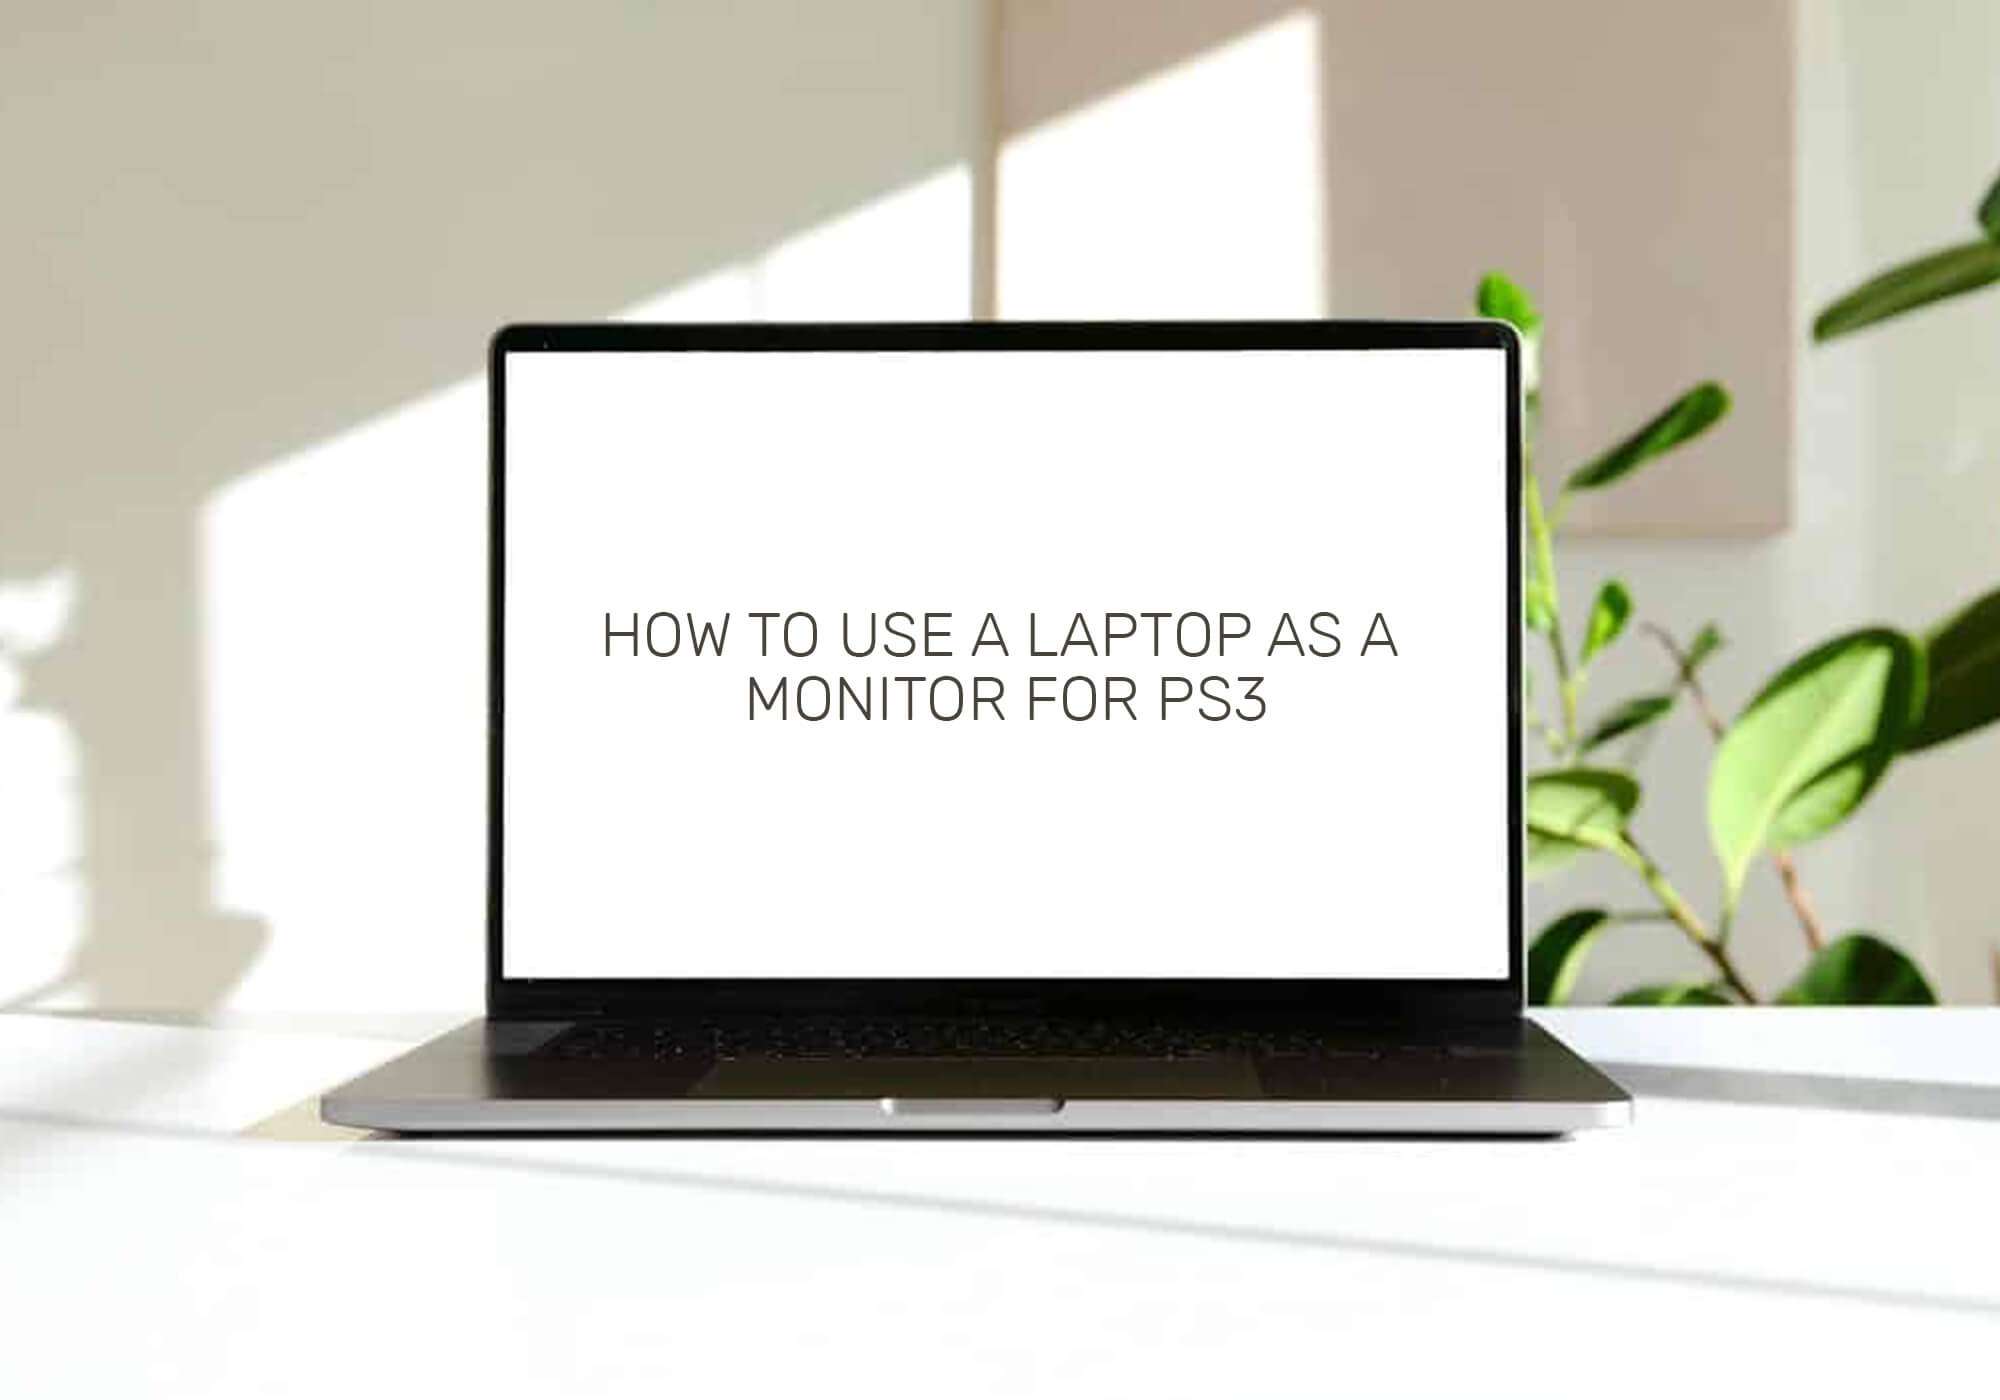 How to use a laptop as a monitor for PS3